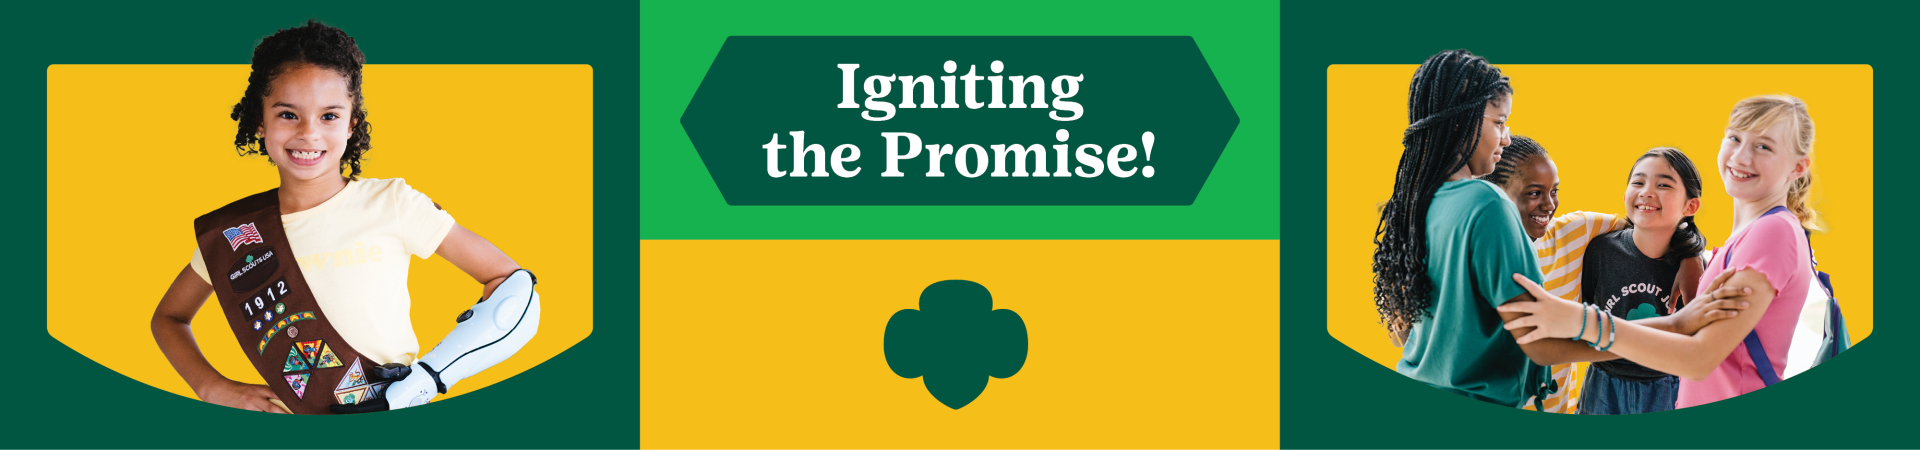  Two Girl Scout Brownies stand arm in arm on the left, in the middle there is text that says "Igniting the Promise" and to the right there is a trefoil. 